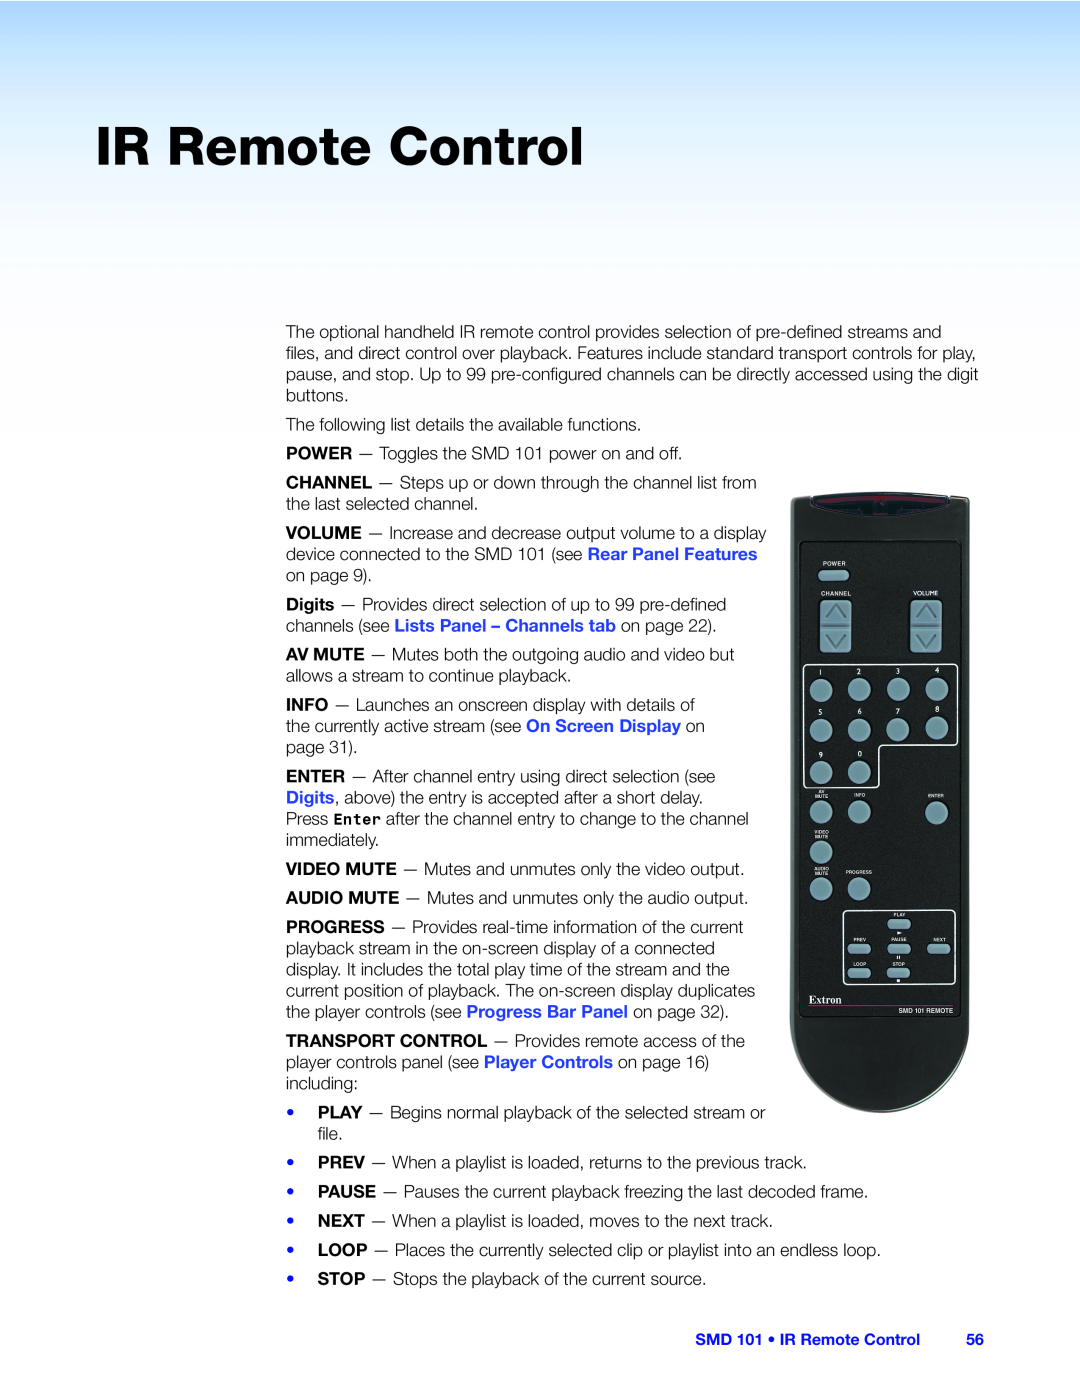 Extron electronic SMD 101 manual IR Remote Control 